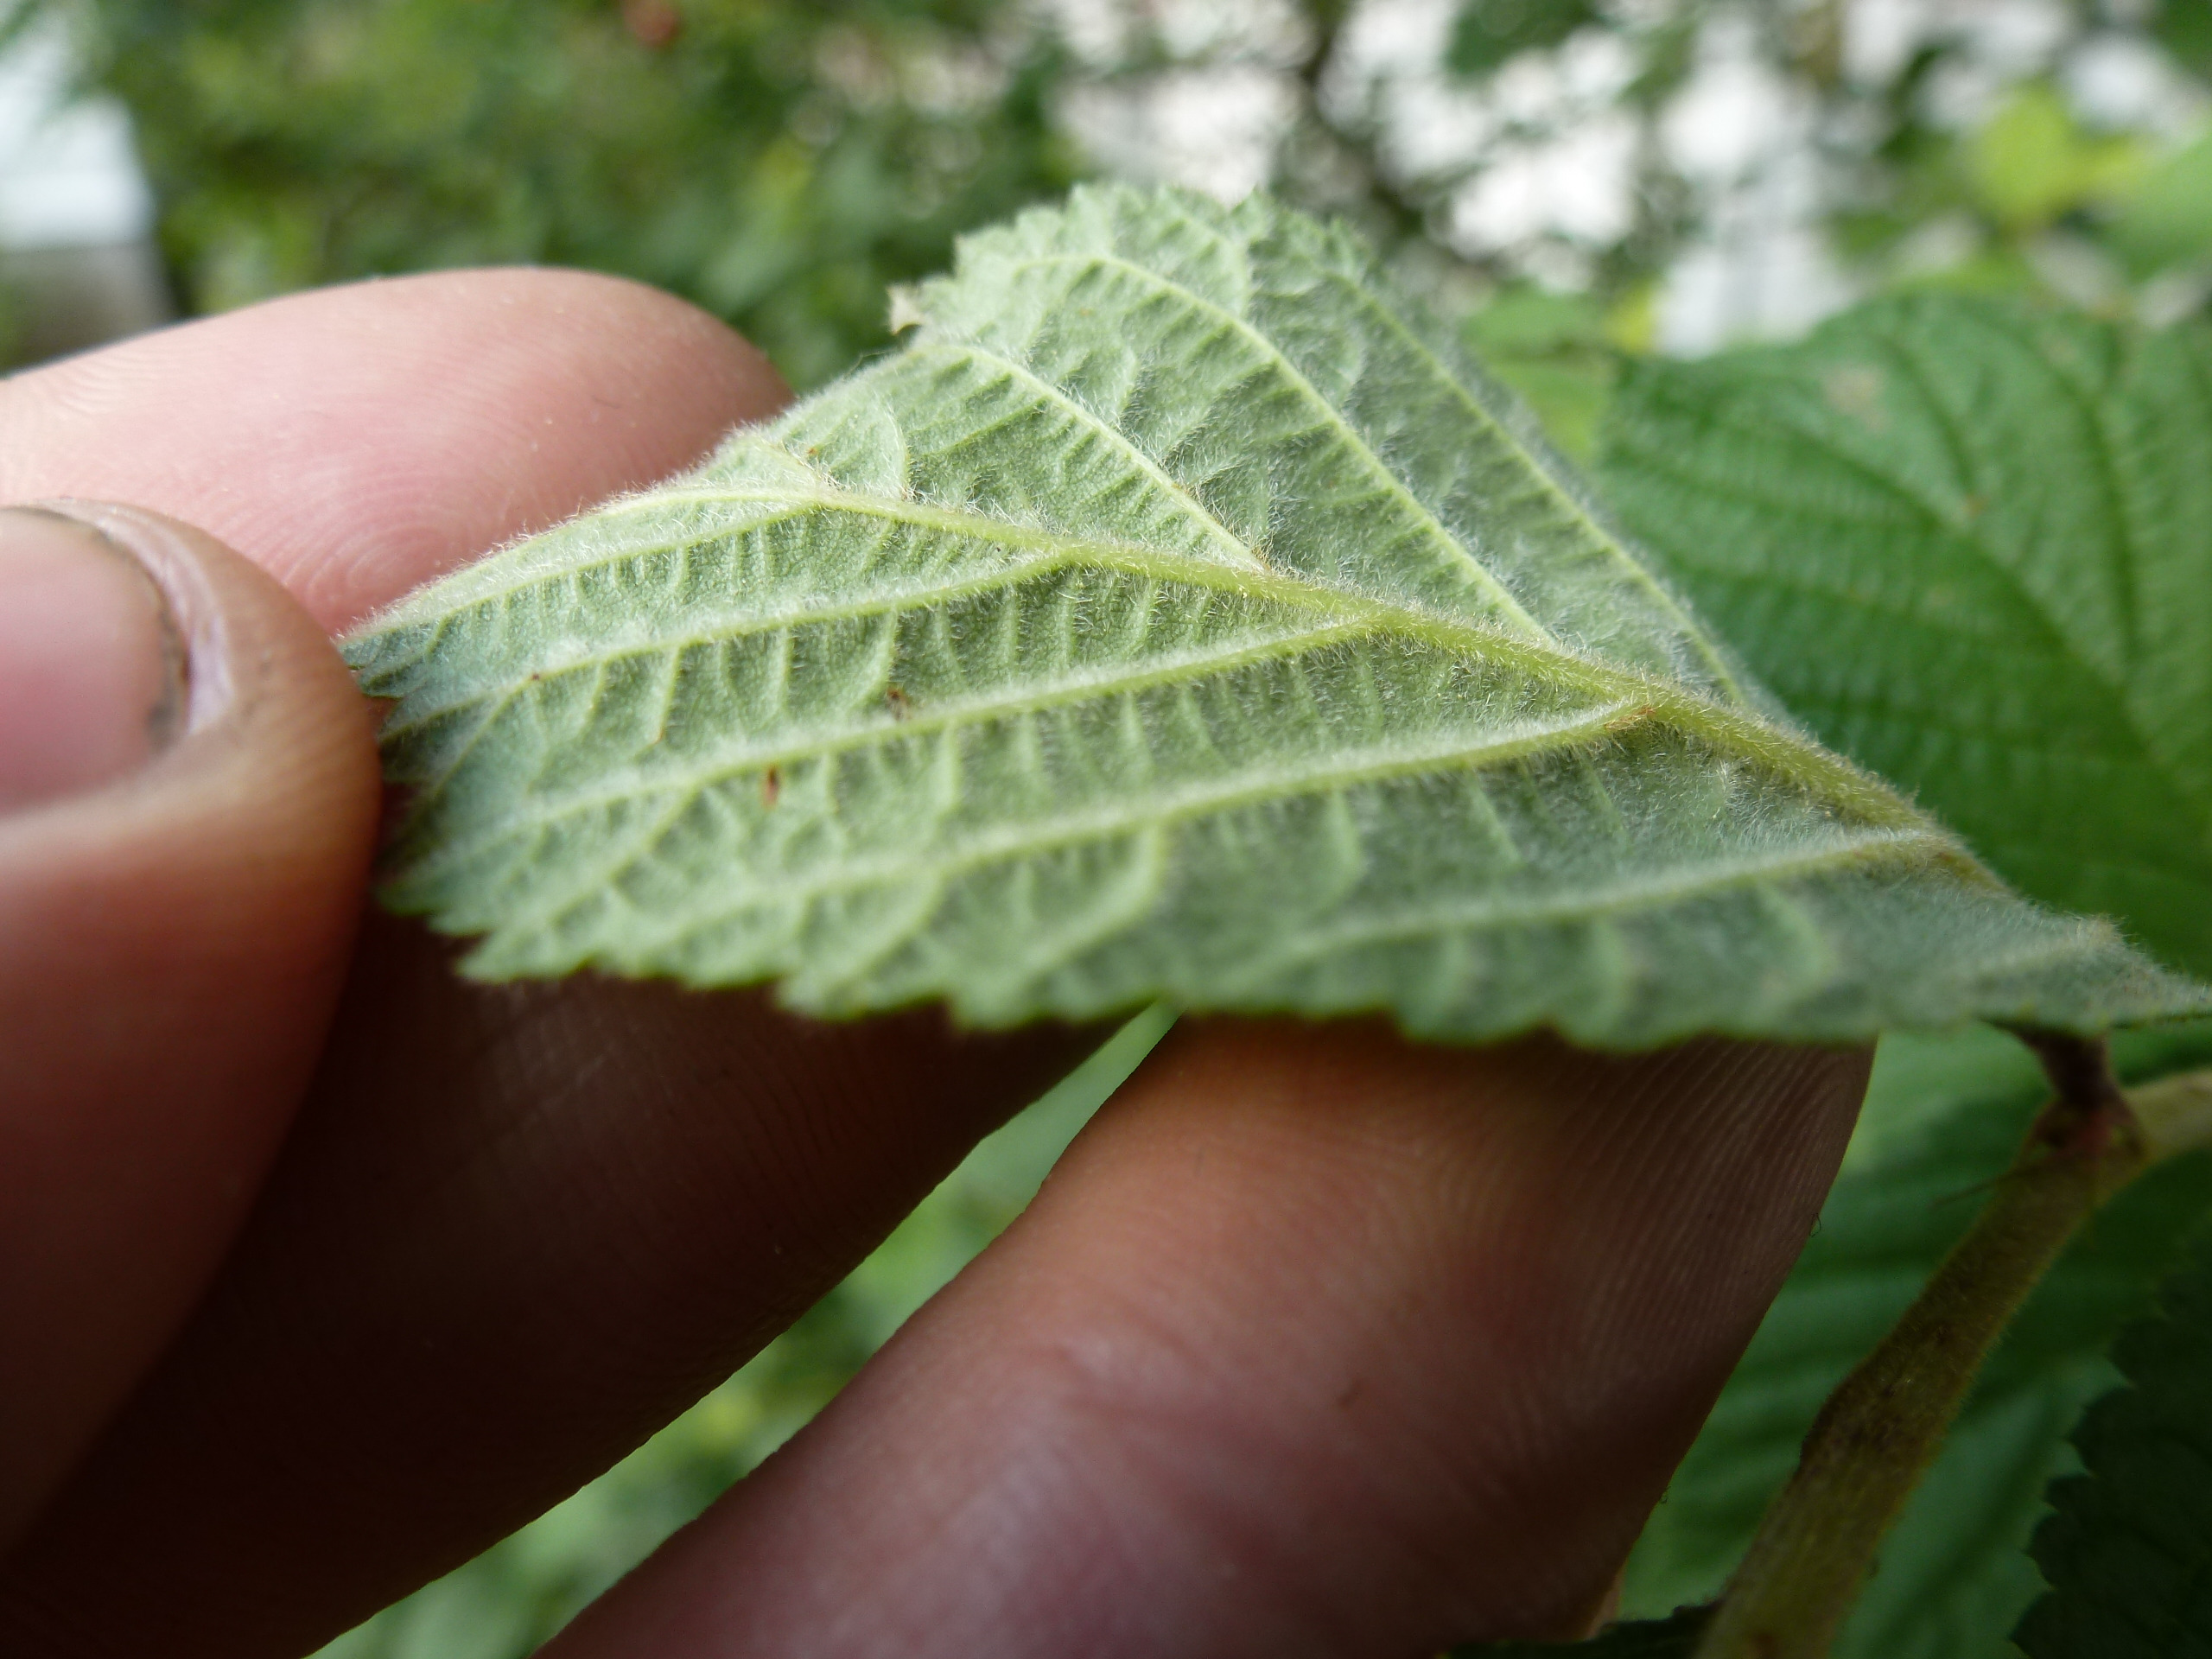 The hairy underside of a Nanking cherry leaf